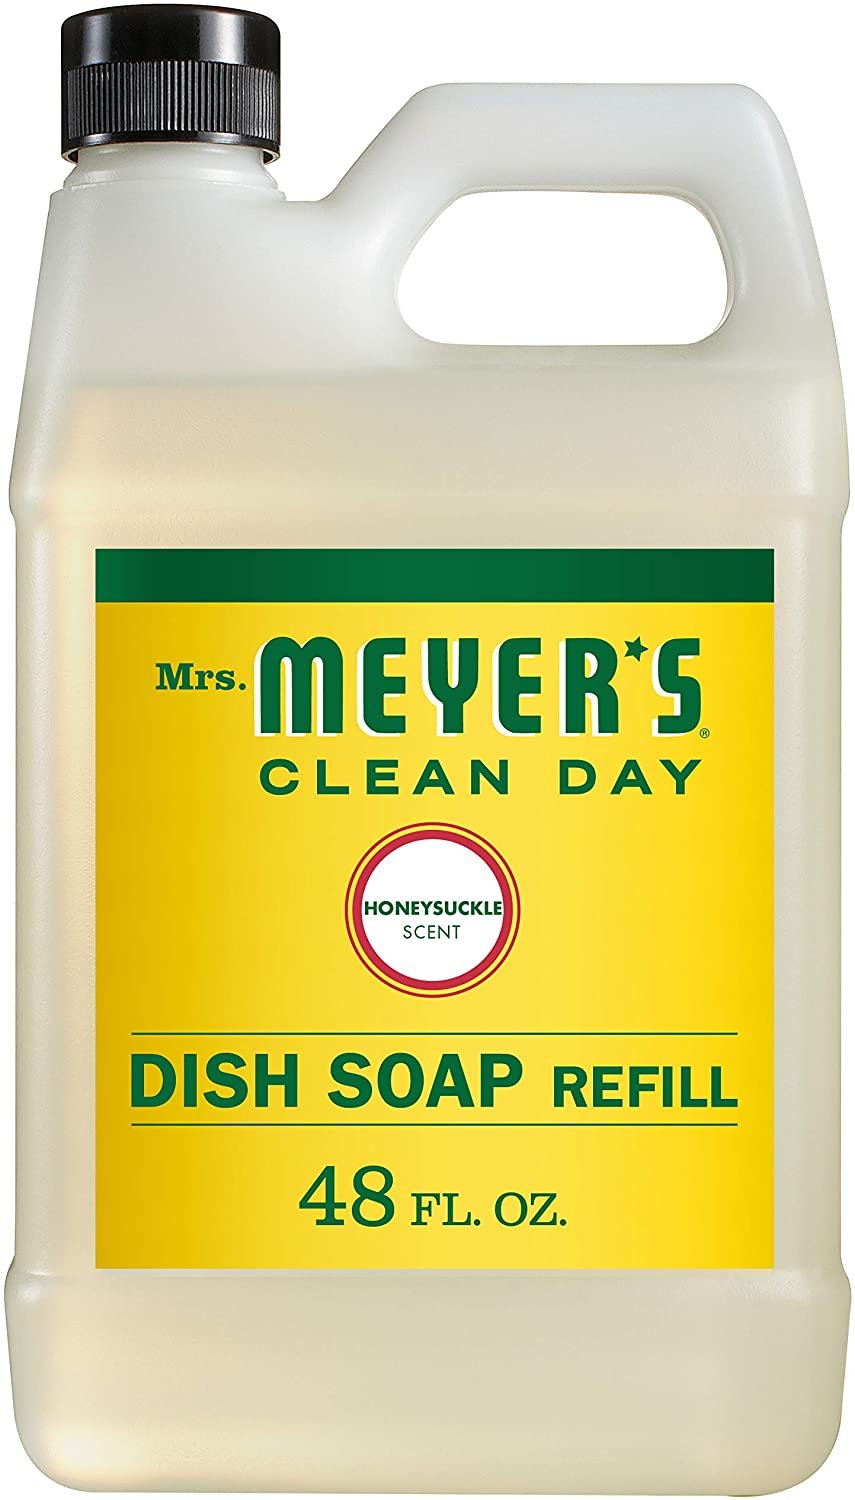 Dish Soap, Honey Suckle Scent, Non Toxic, Ultra-Concentrated, Without Dyes, Parabens, Phosphates, Phthalates, Pack of 6, 48 FL OZ Per Pack